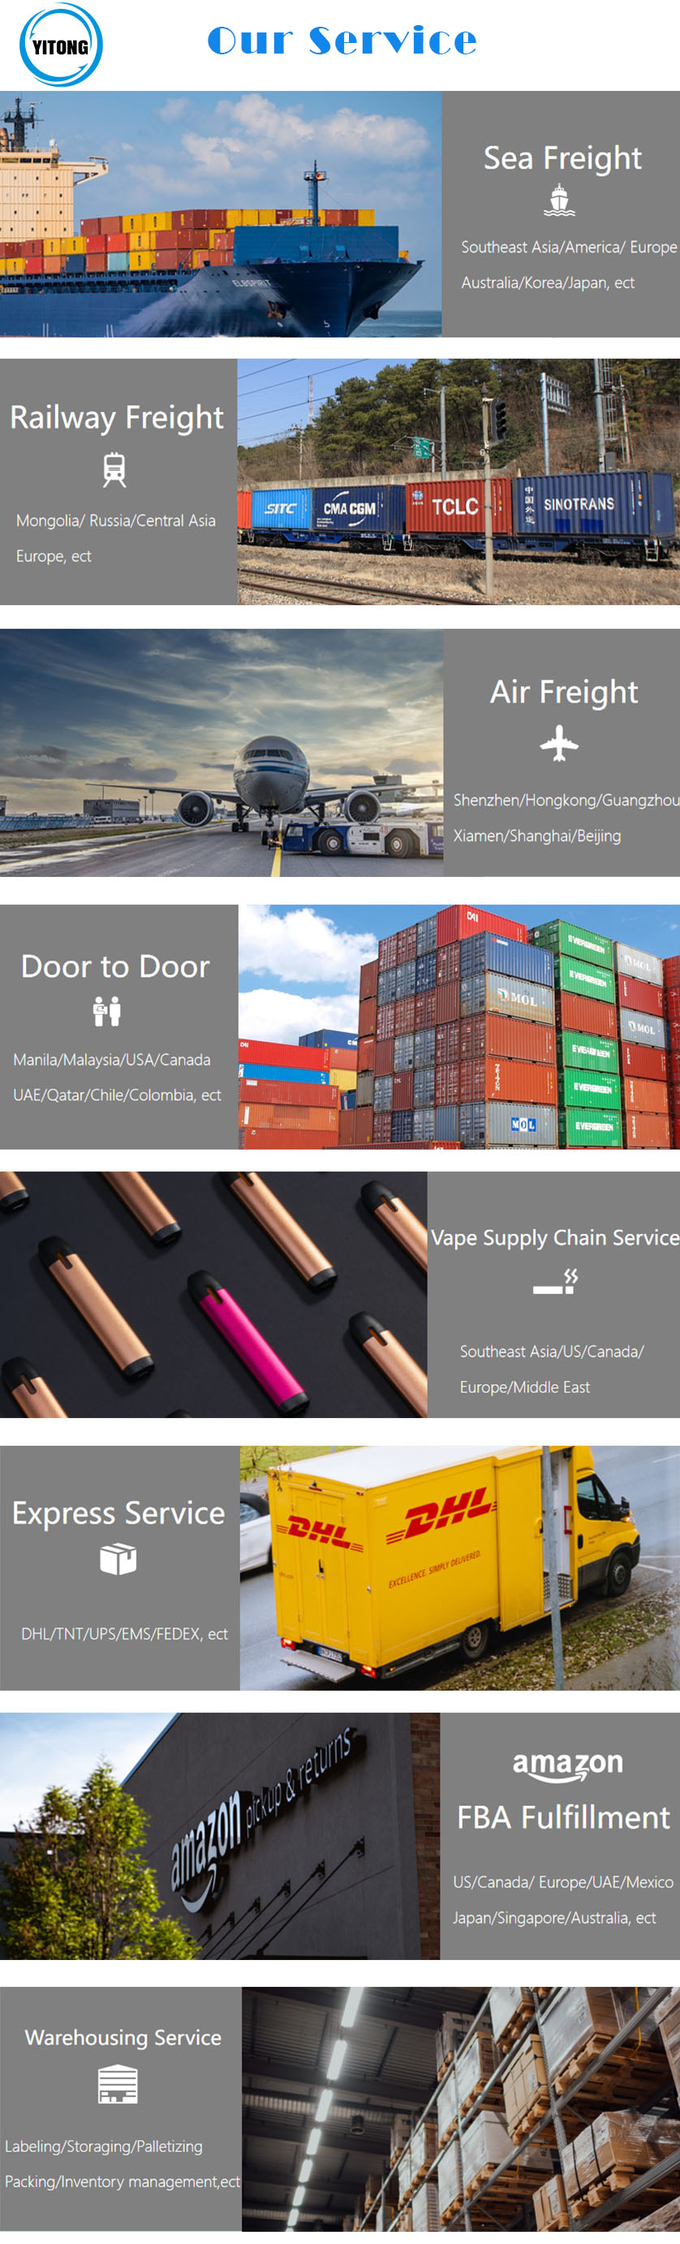 International Door To Door Freight from Shenzhen to Houston Competitive Rate 0